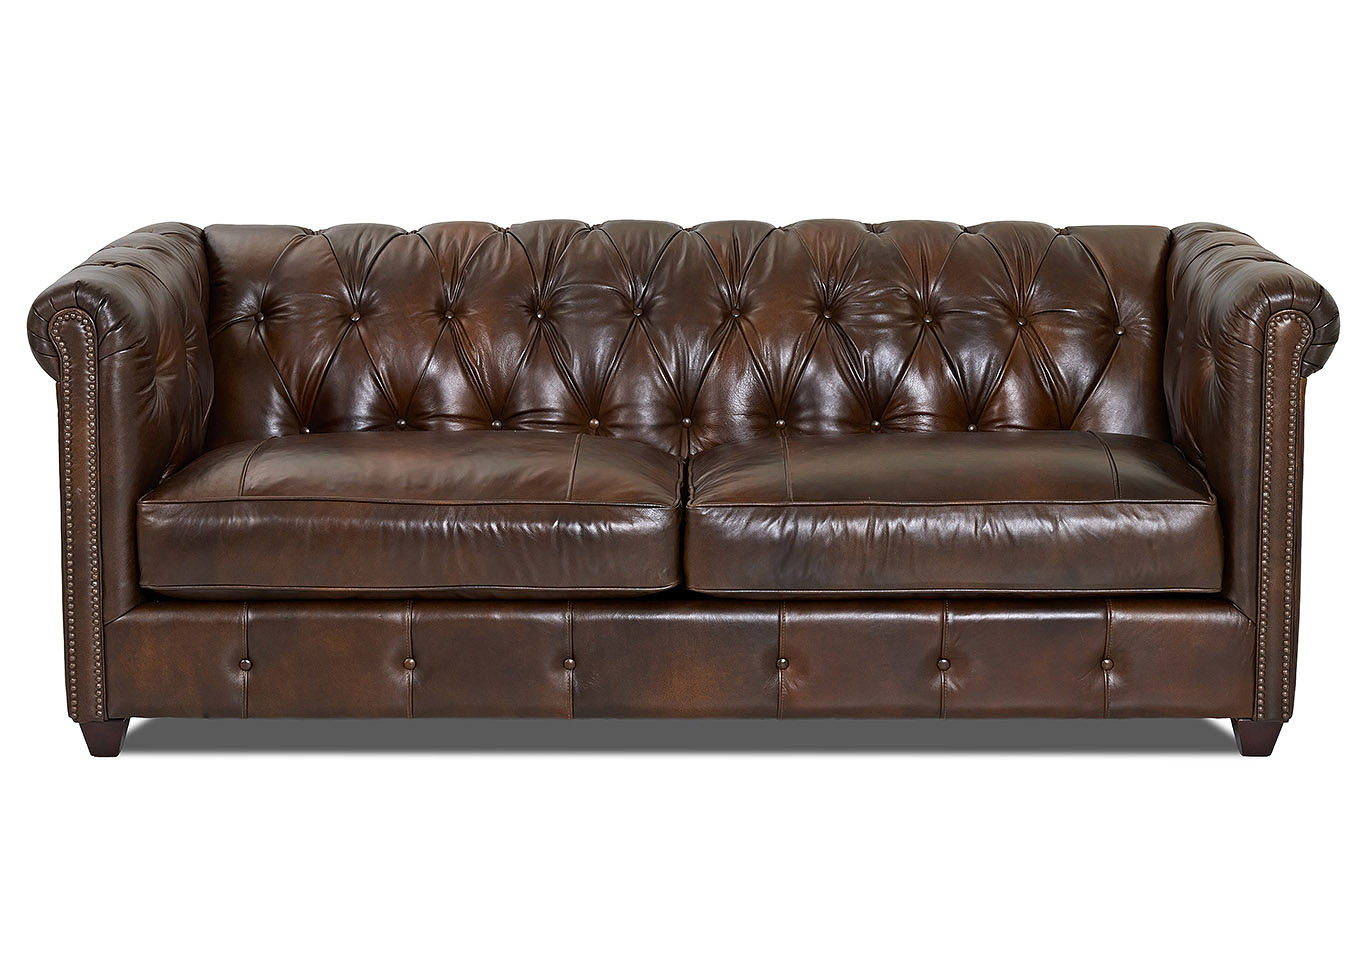 Beech Mountain Leather Stationary Sofa,Klaussner Home Furnishings